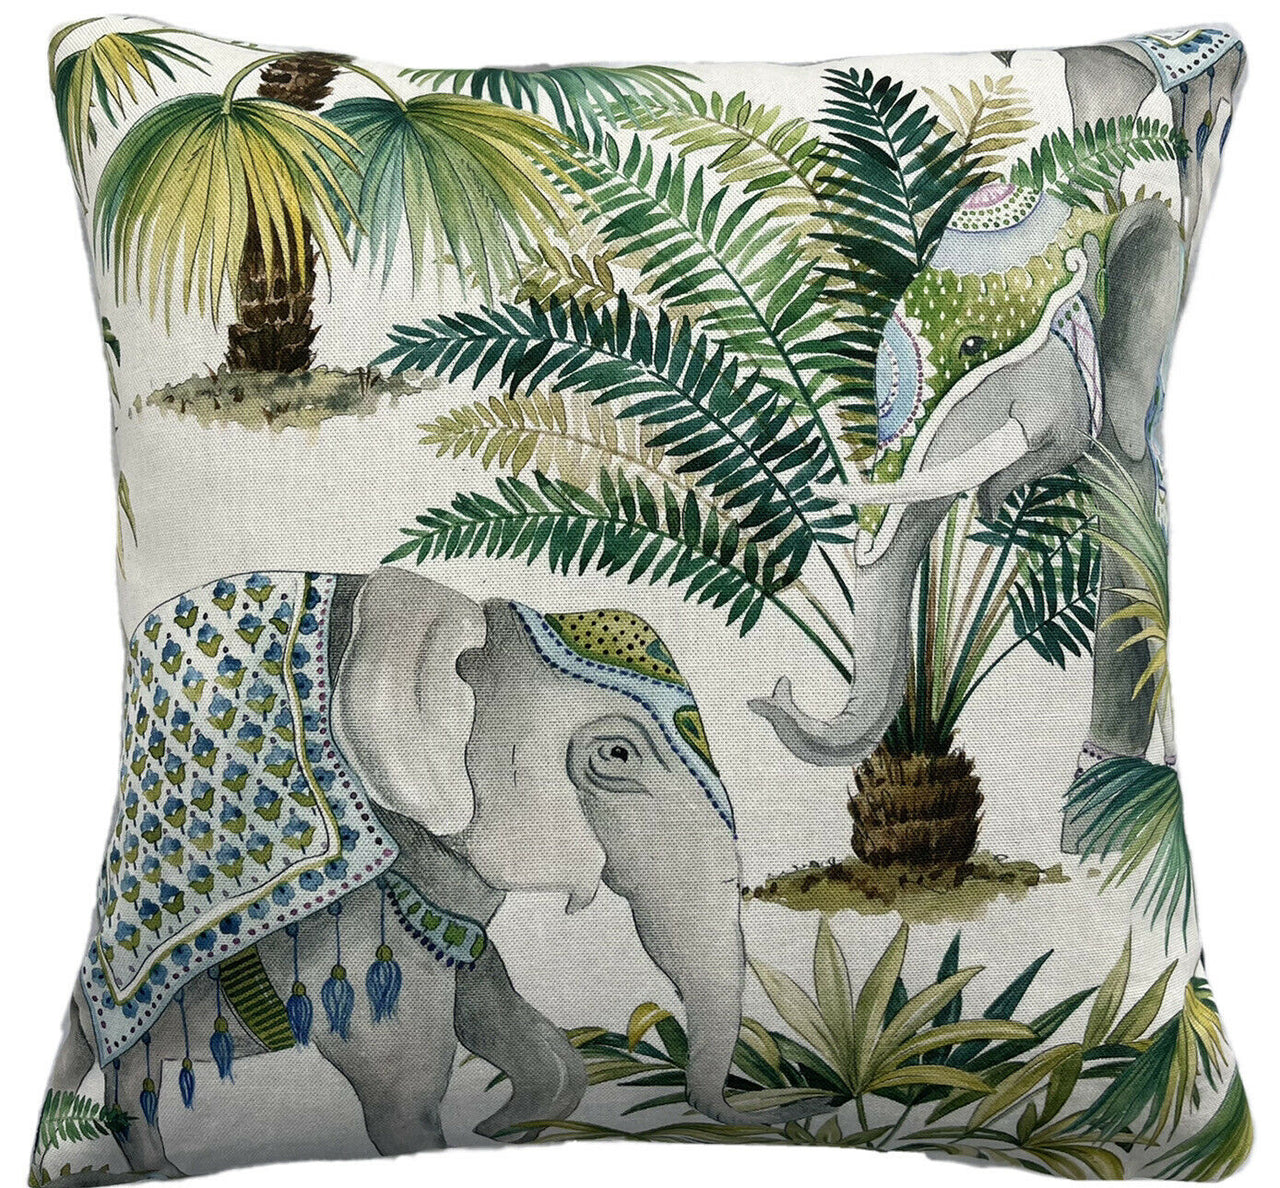 Elephant Festival Cushion Cover Palm Tree Botanical Throw Pillow Green Teal Pink